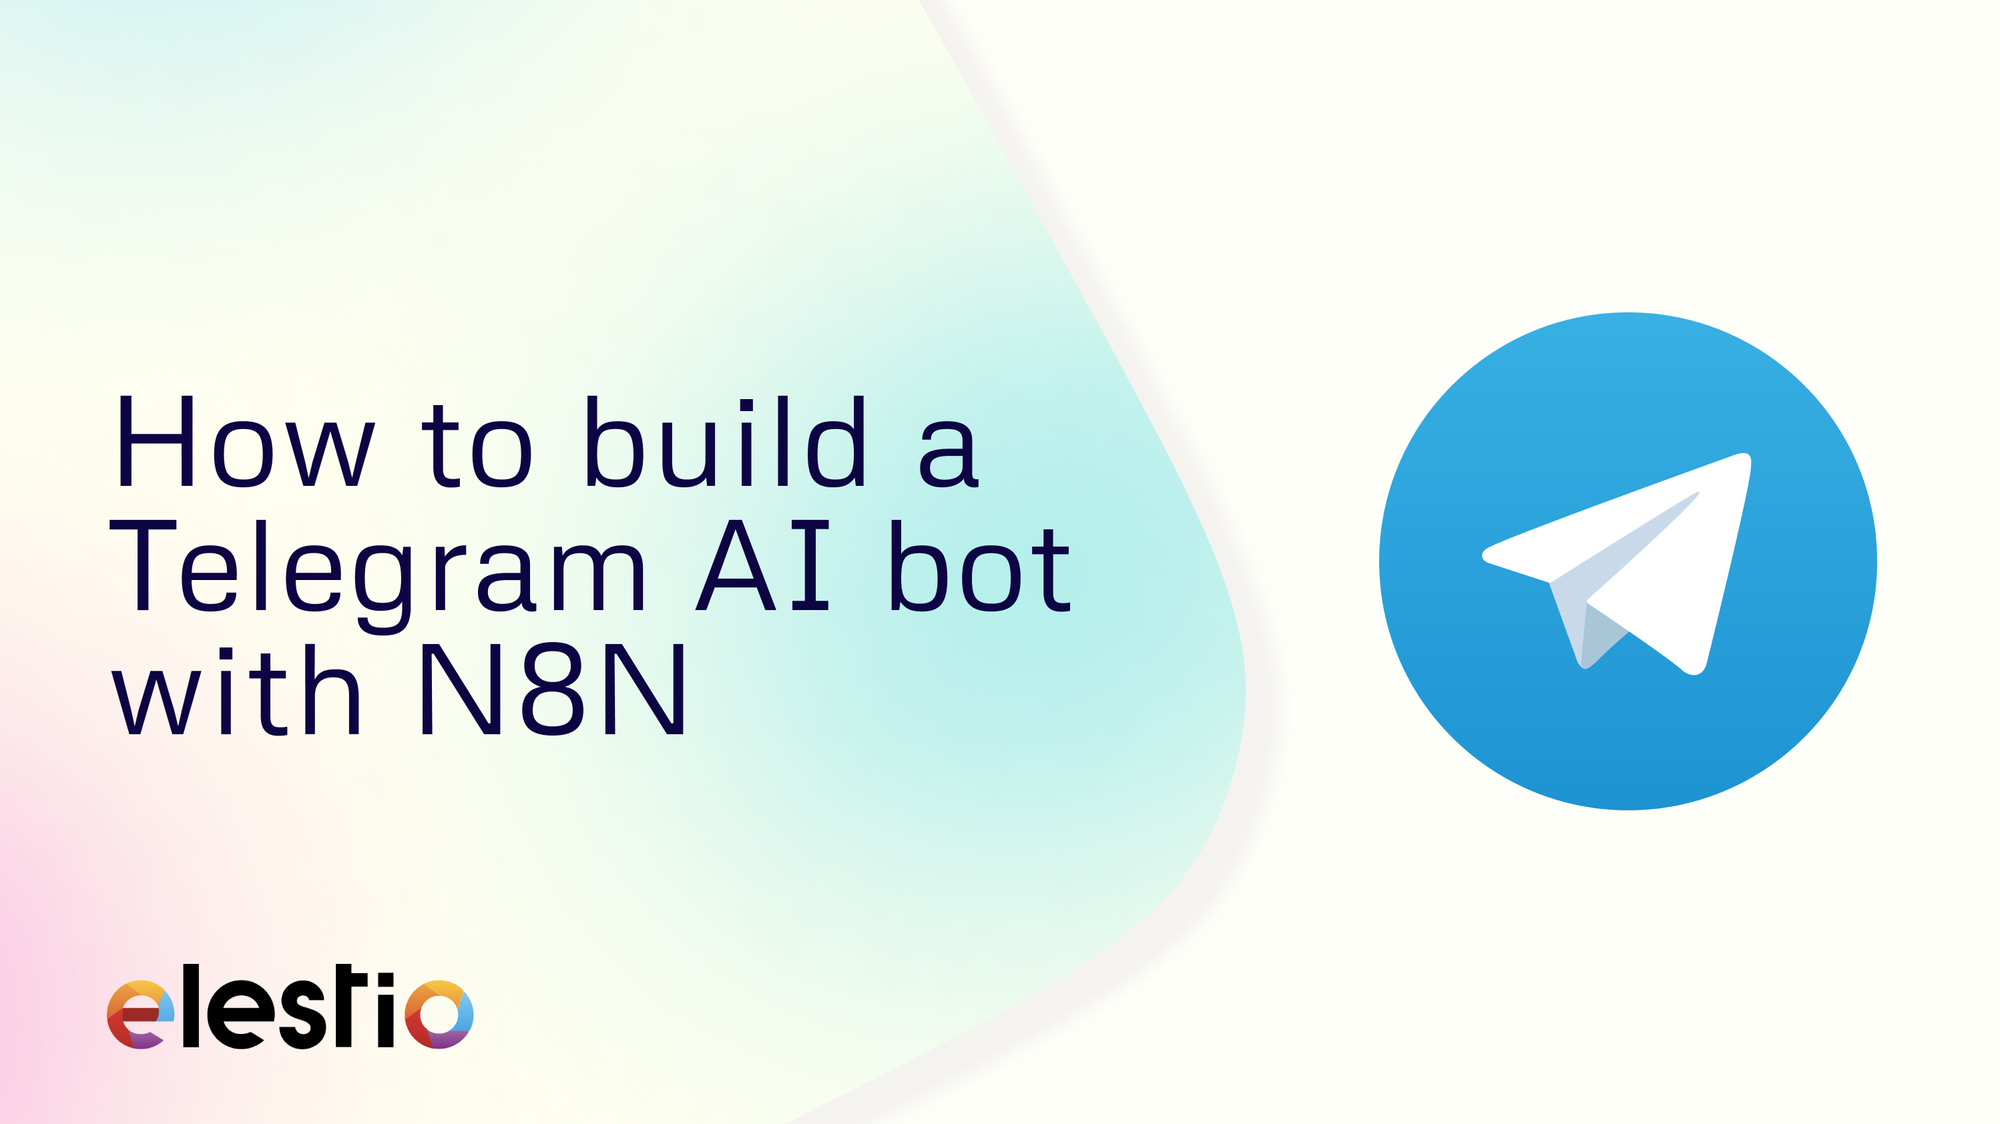 How to build a Telegram AI bot with N8N